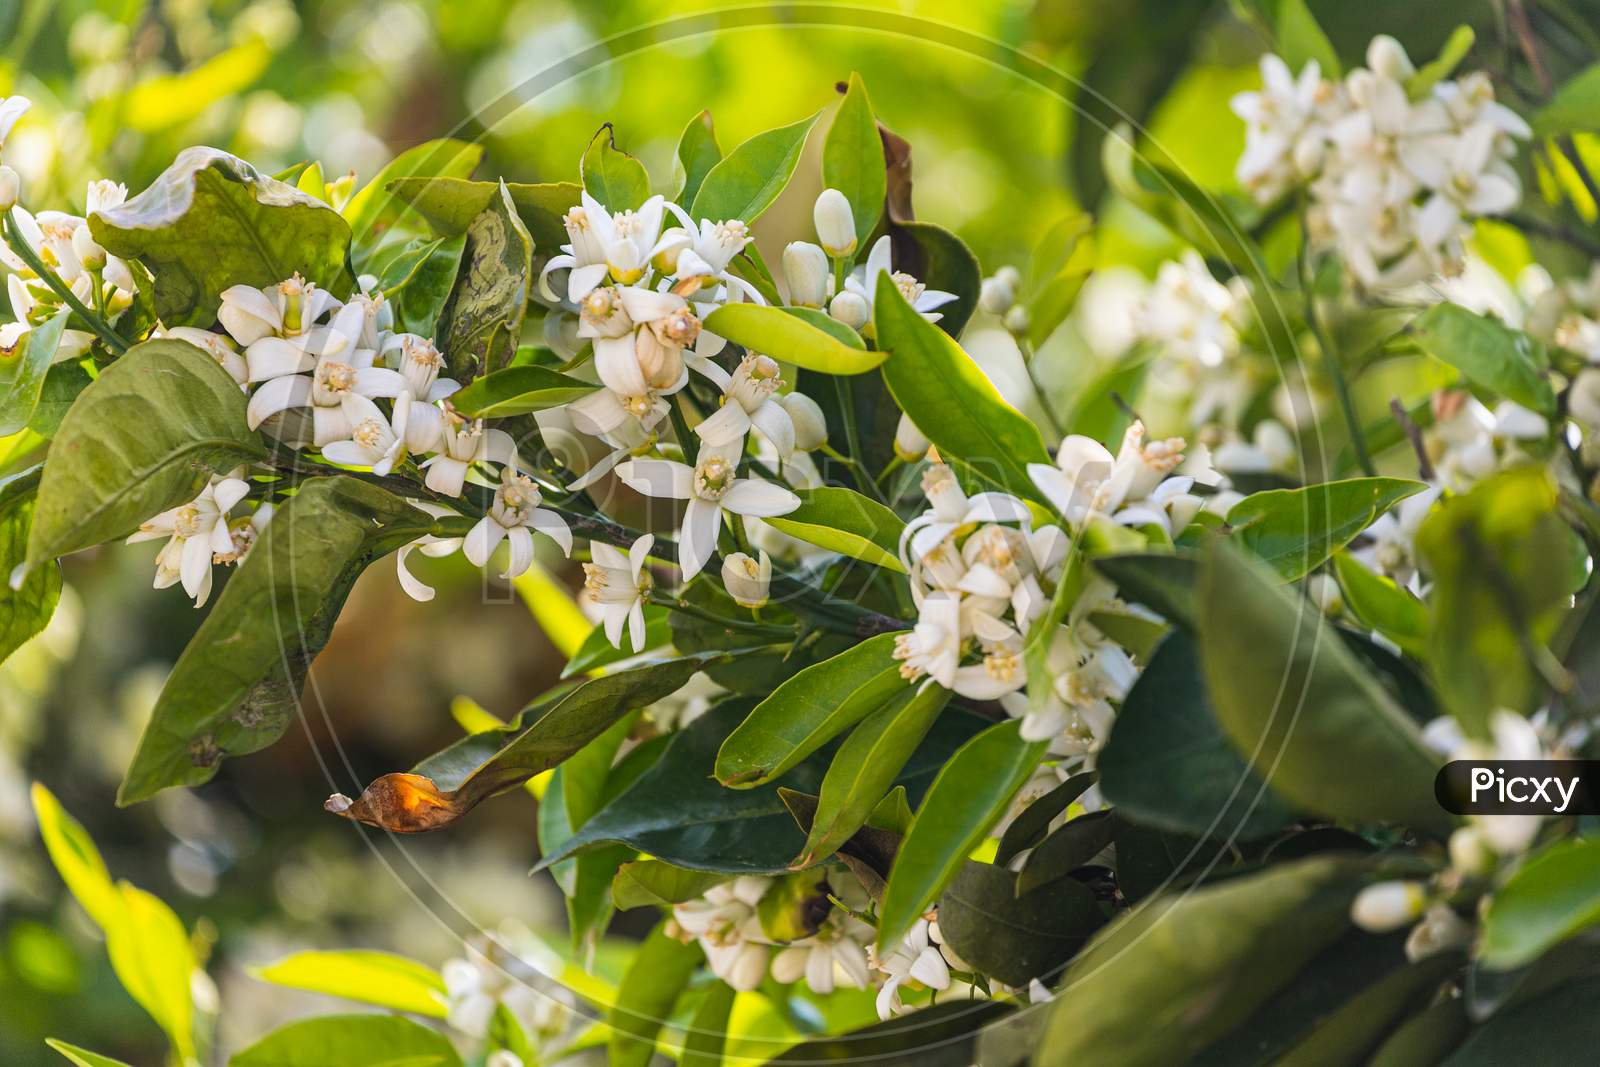 Close-Up Beautiful Orange Tree With Many White Flower Surrounded By Many Bright Green Leaves, Soft Focus